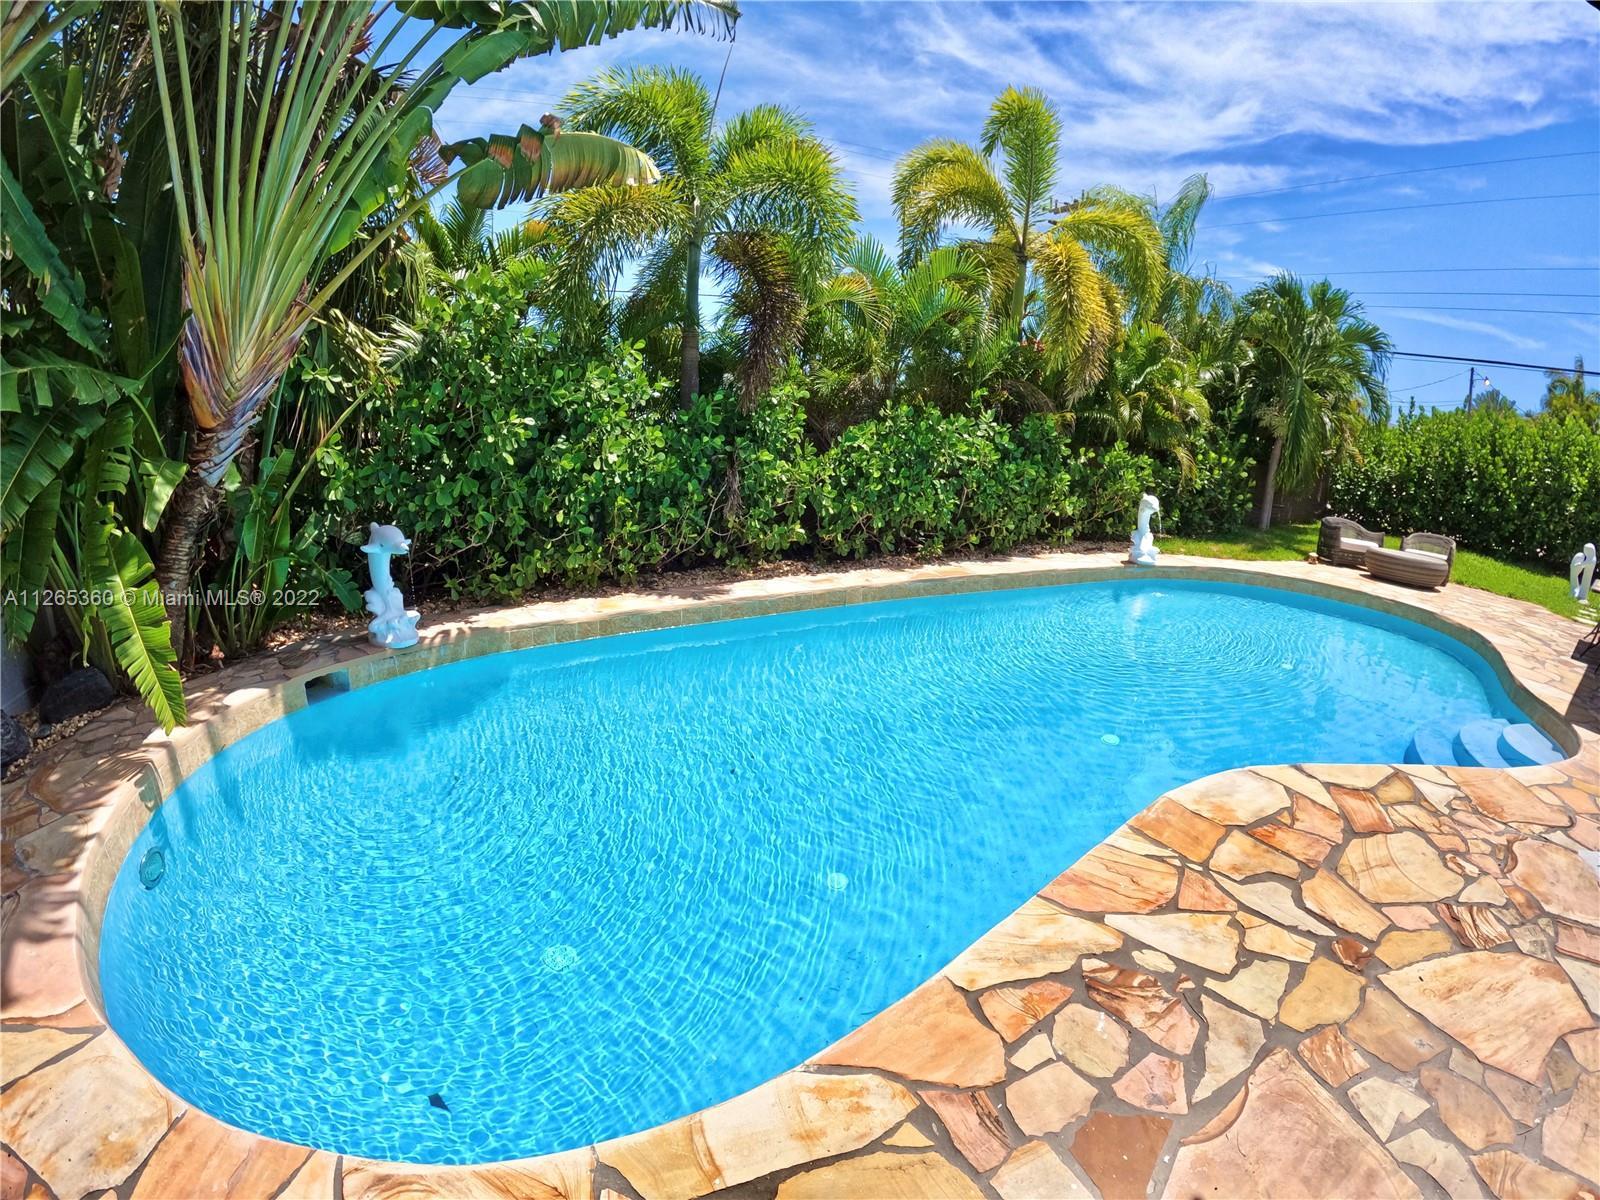 Unique 3+1 Bedroom 3 Bath home in the beautiful neighborhood of Pompano Isles. Features a tropical o